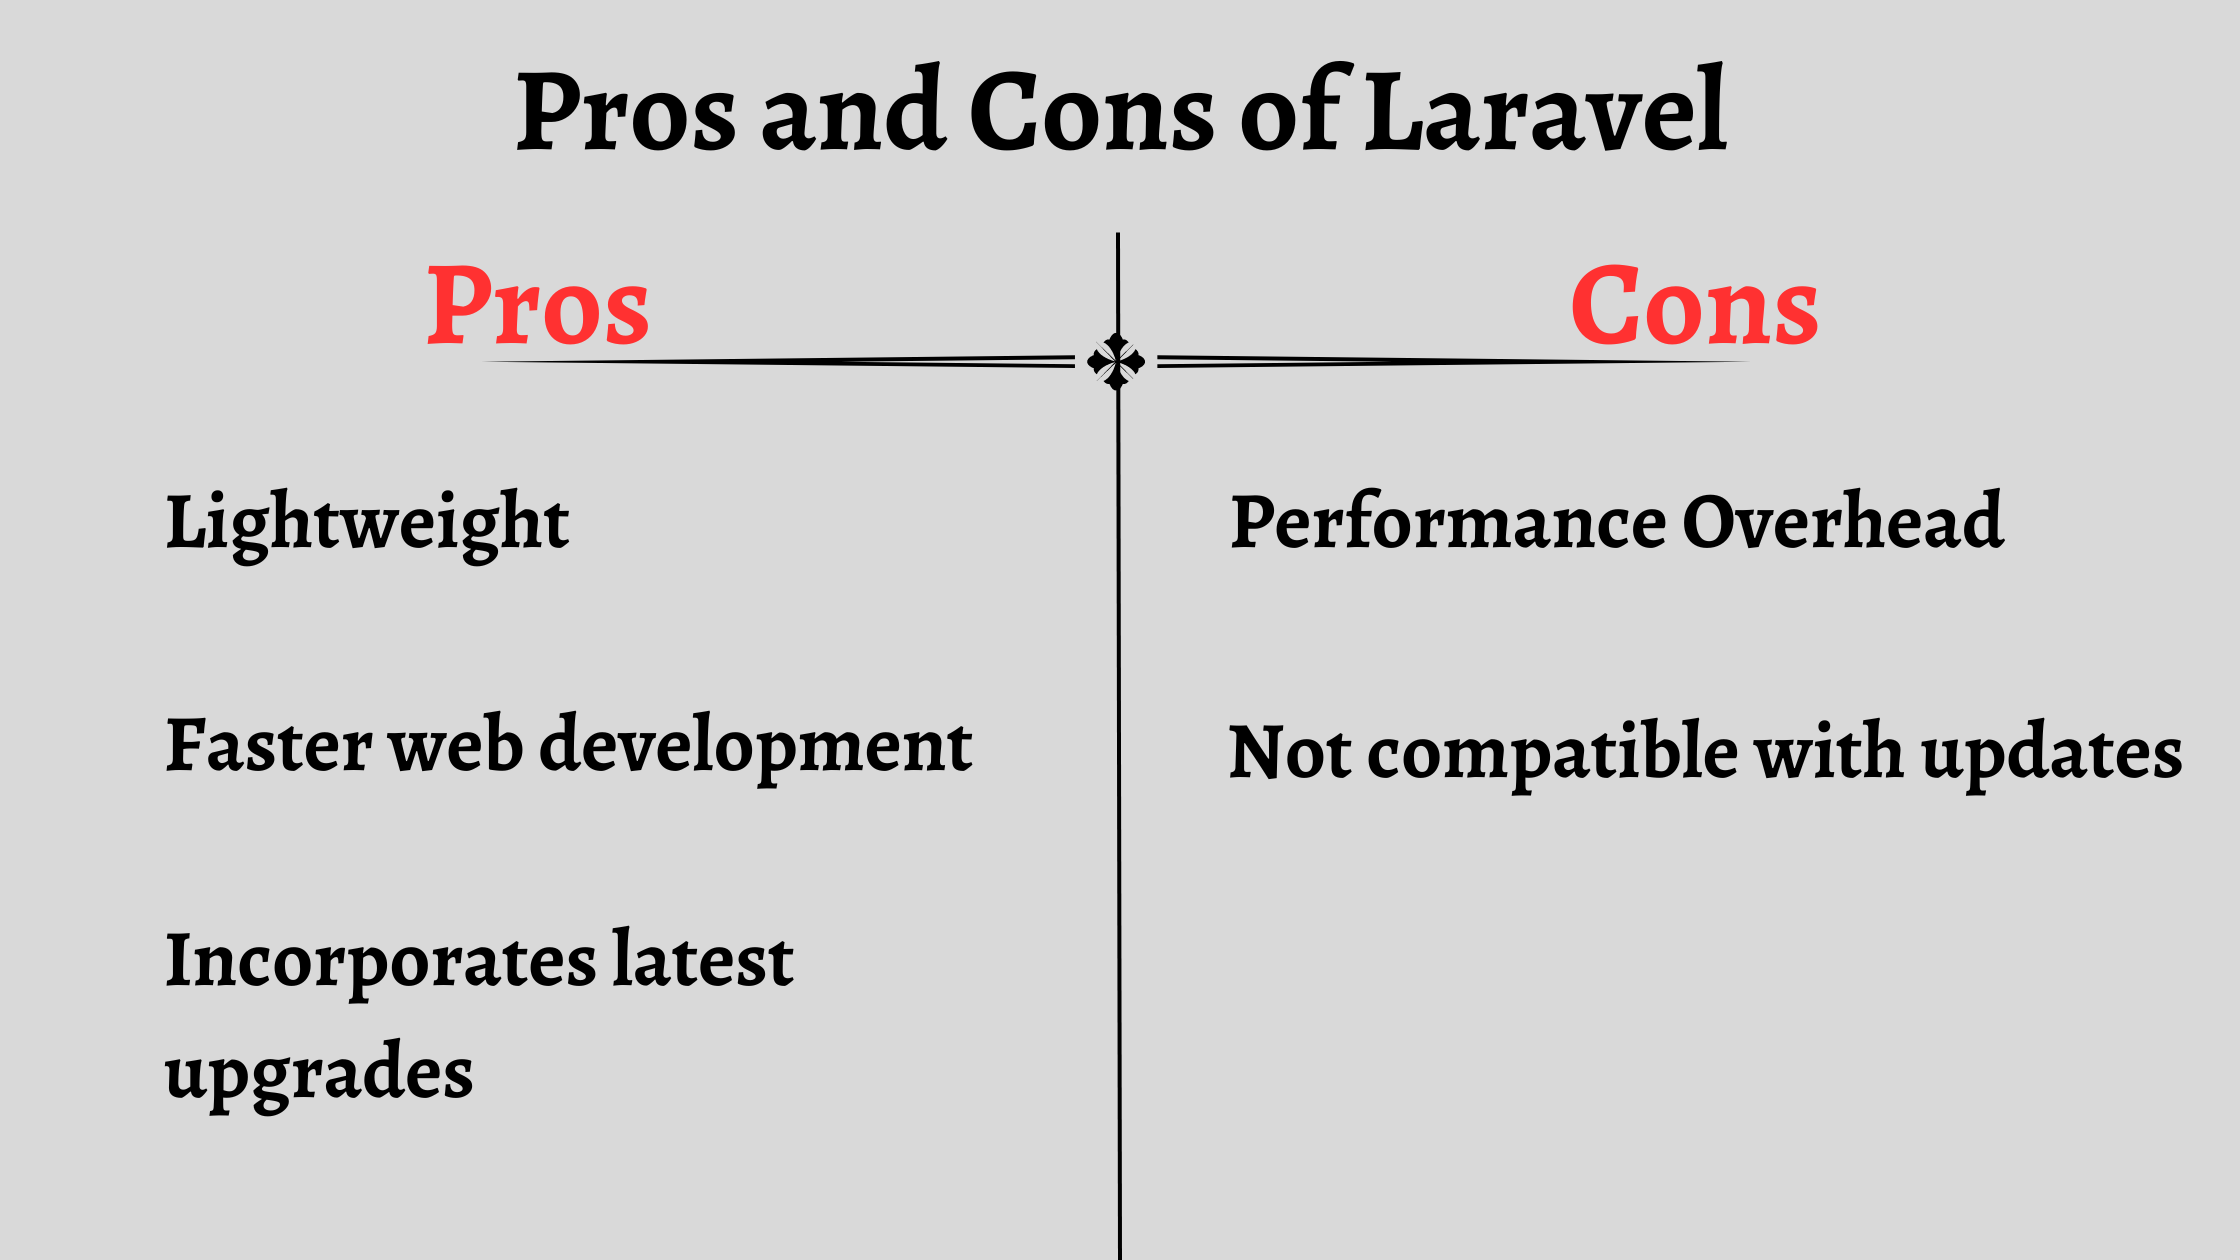 Pros and Cons of Laravel